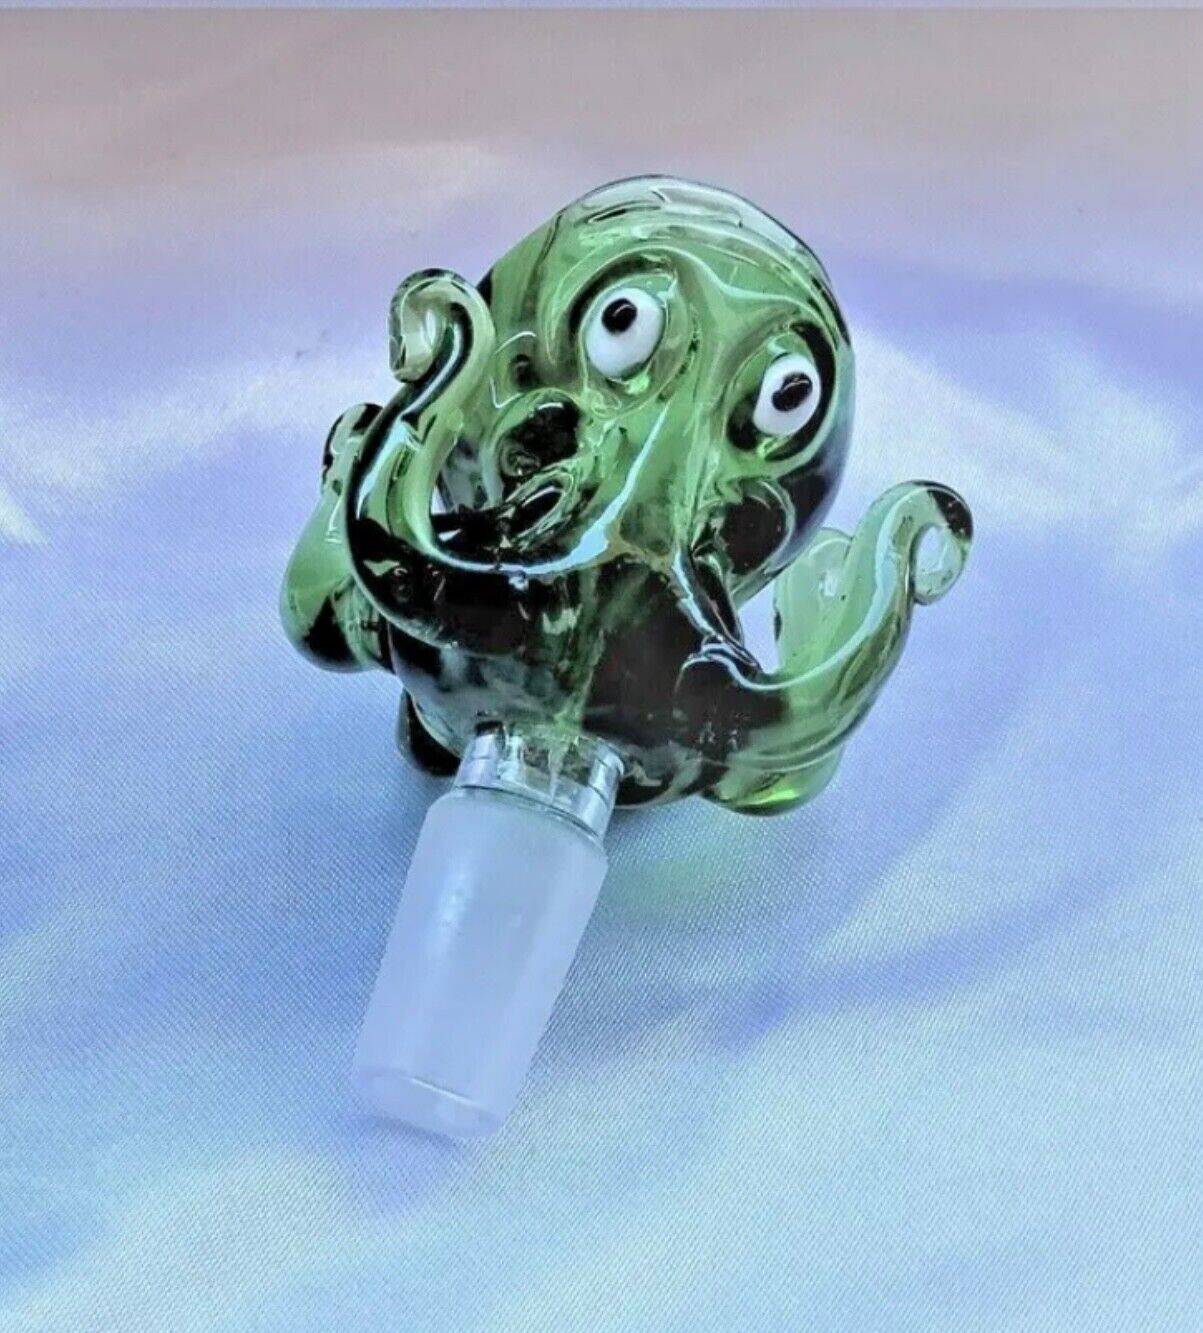 Primium 14mm Green Thick Glass Octopus Male Bowl Head Piece